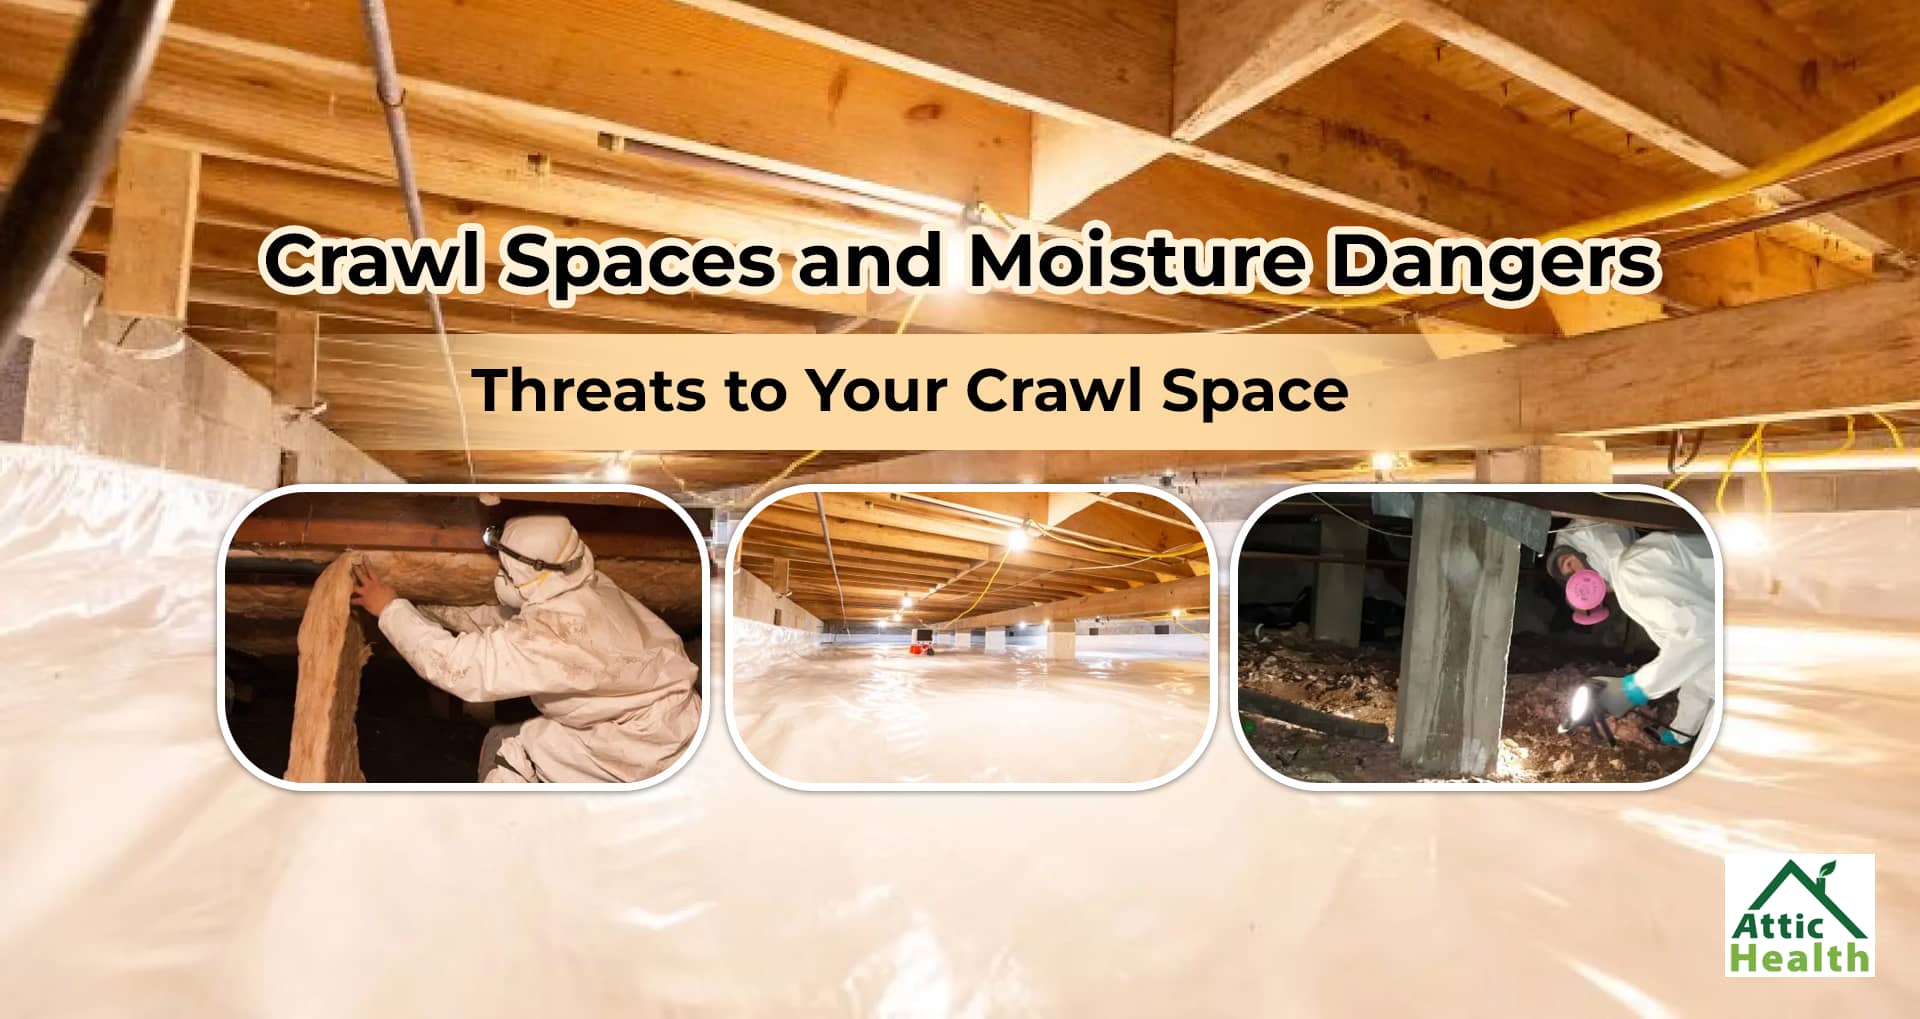 How to remove crawl space moisture in 3 stages seen in the image. Attic Health professionals are available to quickly respond to issues with professional equipment and knowledge of best moisture removal practices. 